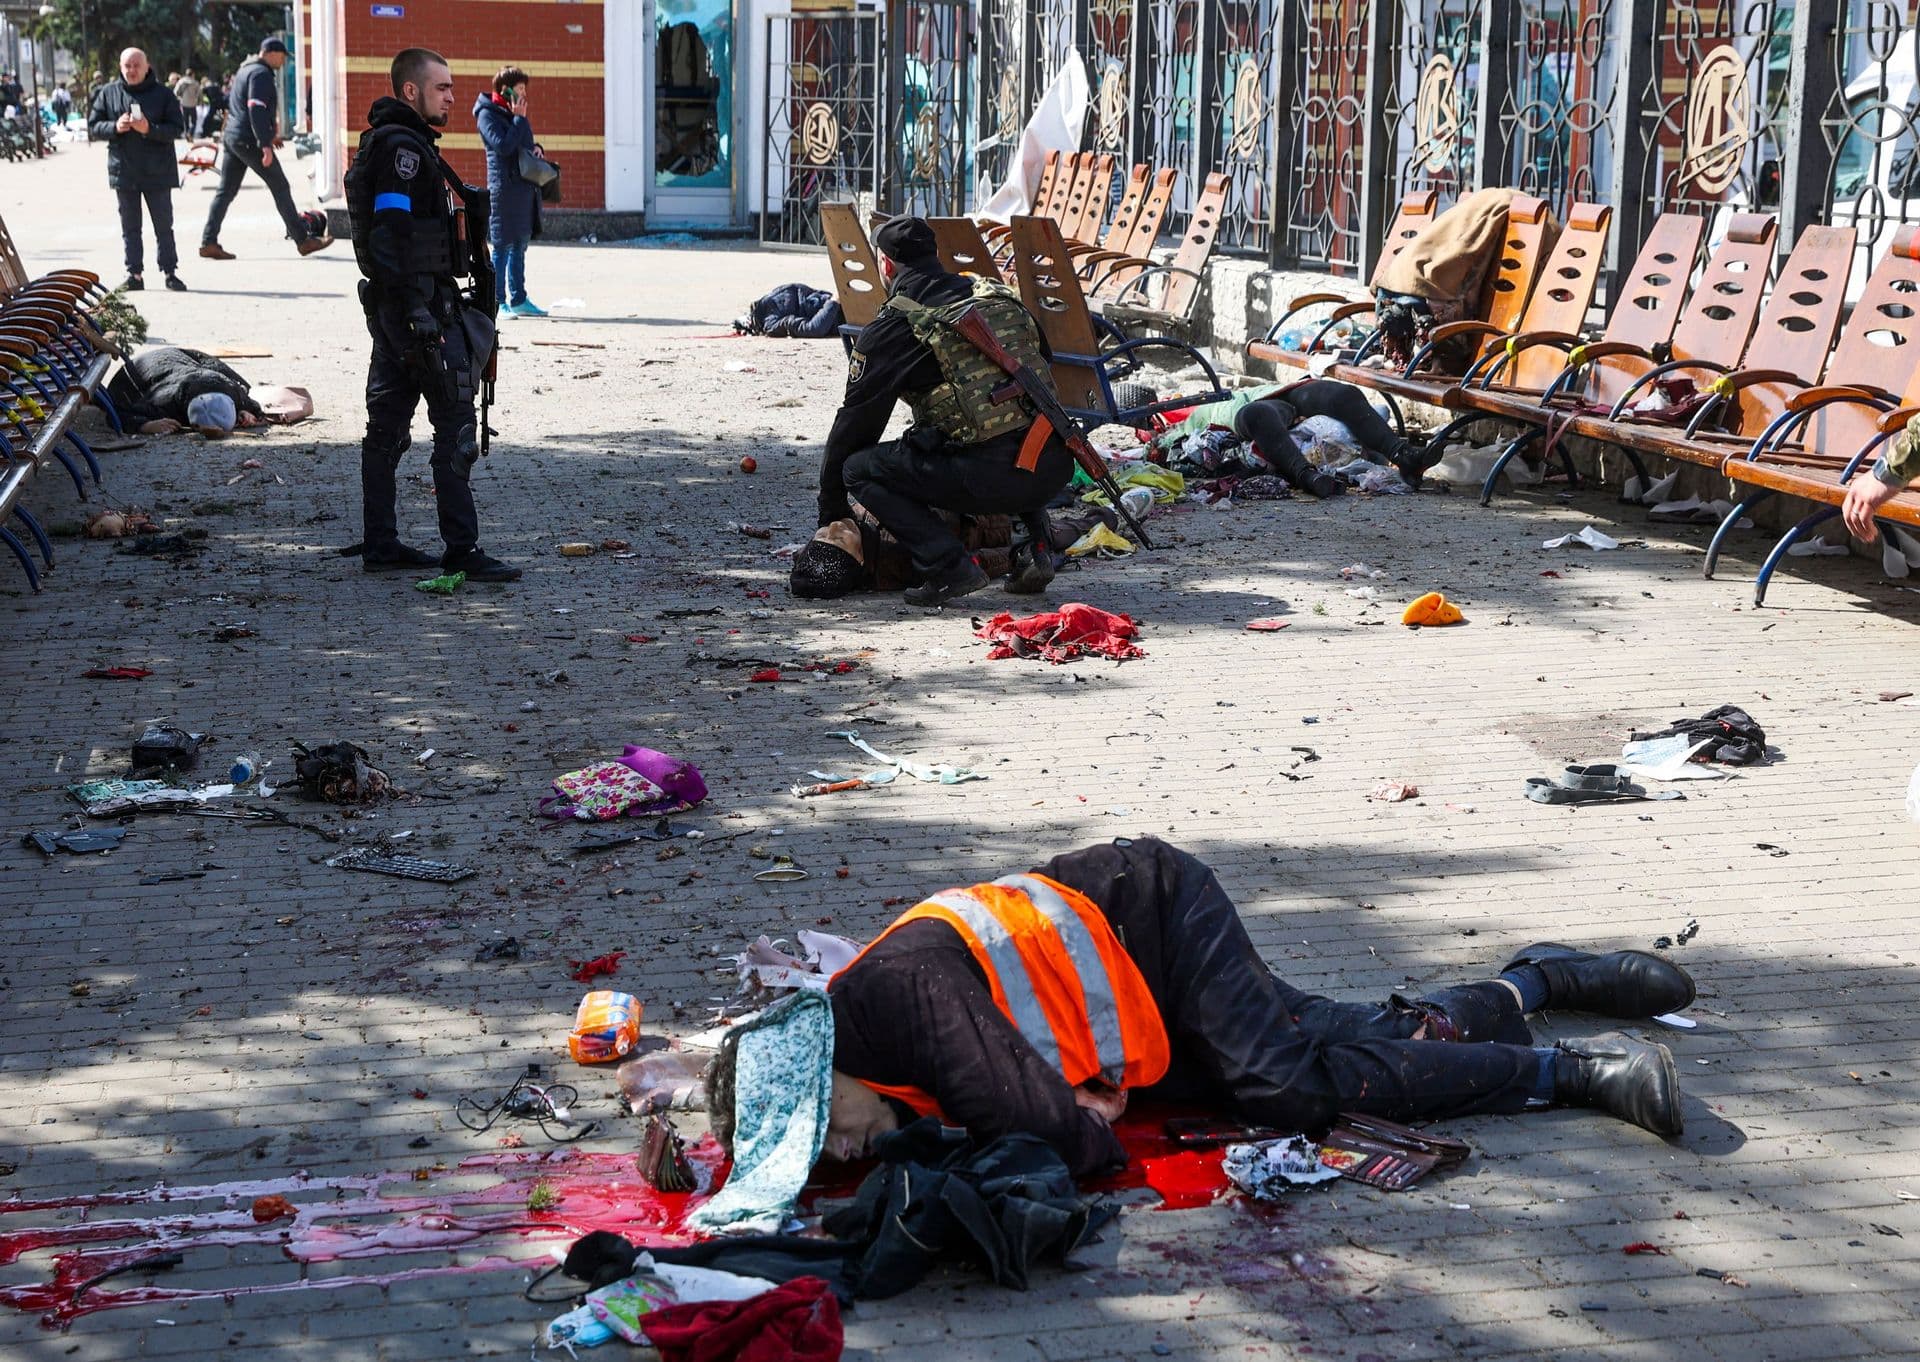 Ukrainian service men check for signs of life among casualties lying on the platform in the aftermath of a rocket attack on the railway station in Kramatorsk